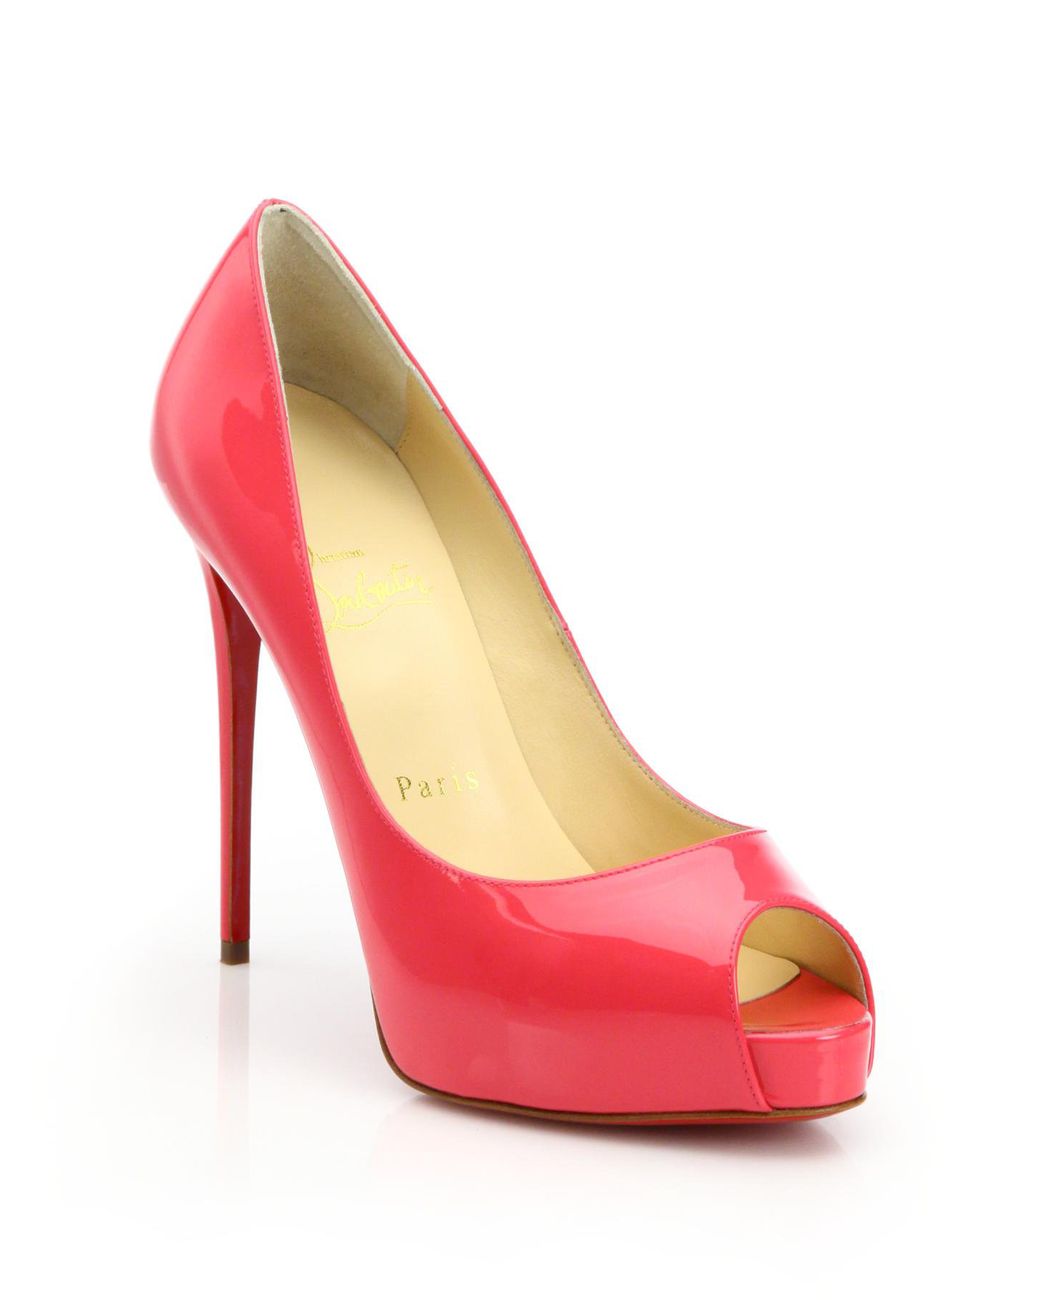 Christian Louboutin Pumps Prive Pink Peep Toe Patent Leather Shoes 38.5  Heels